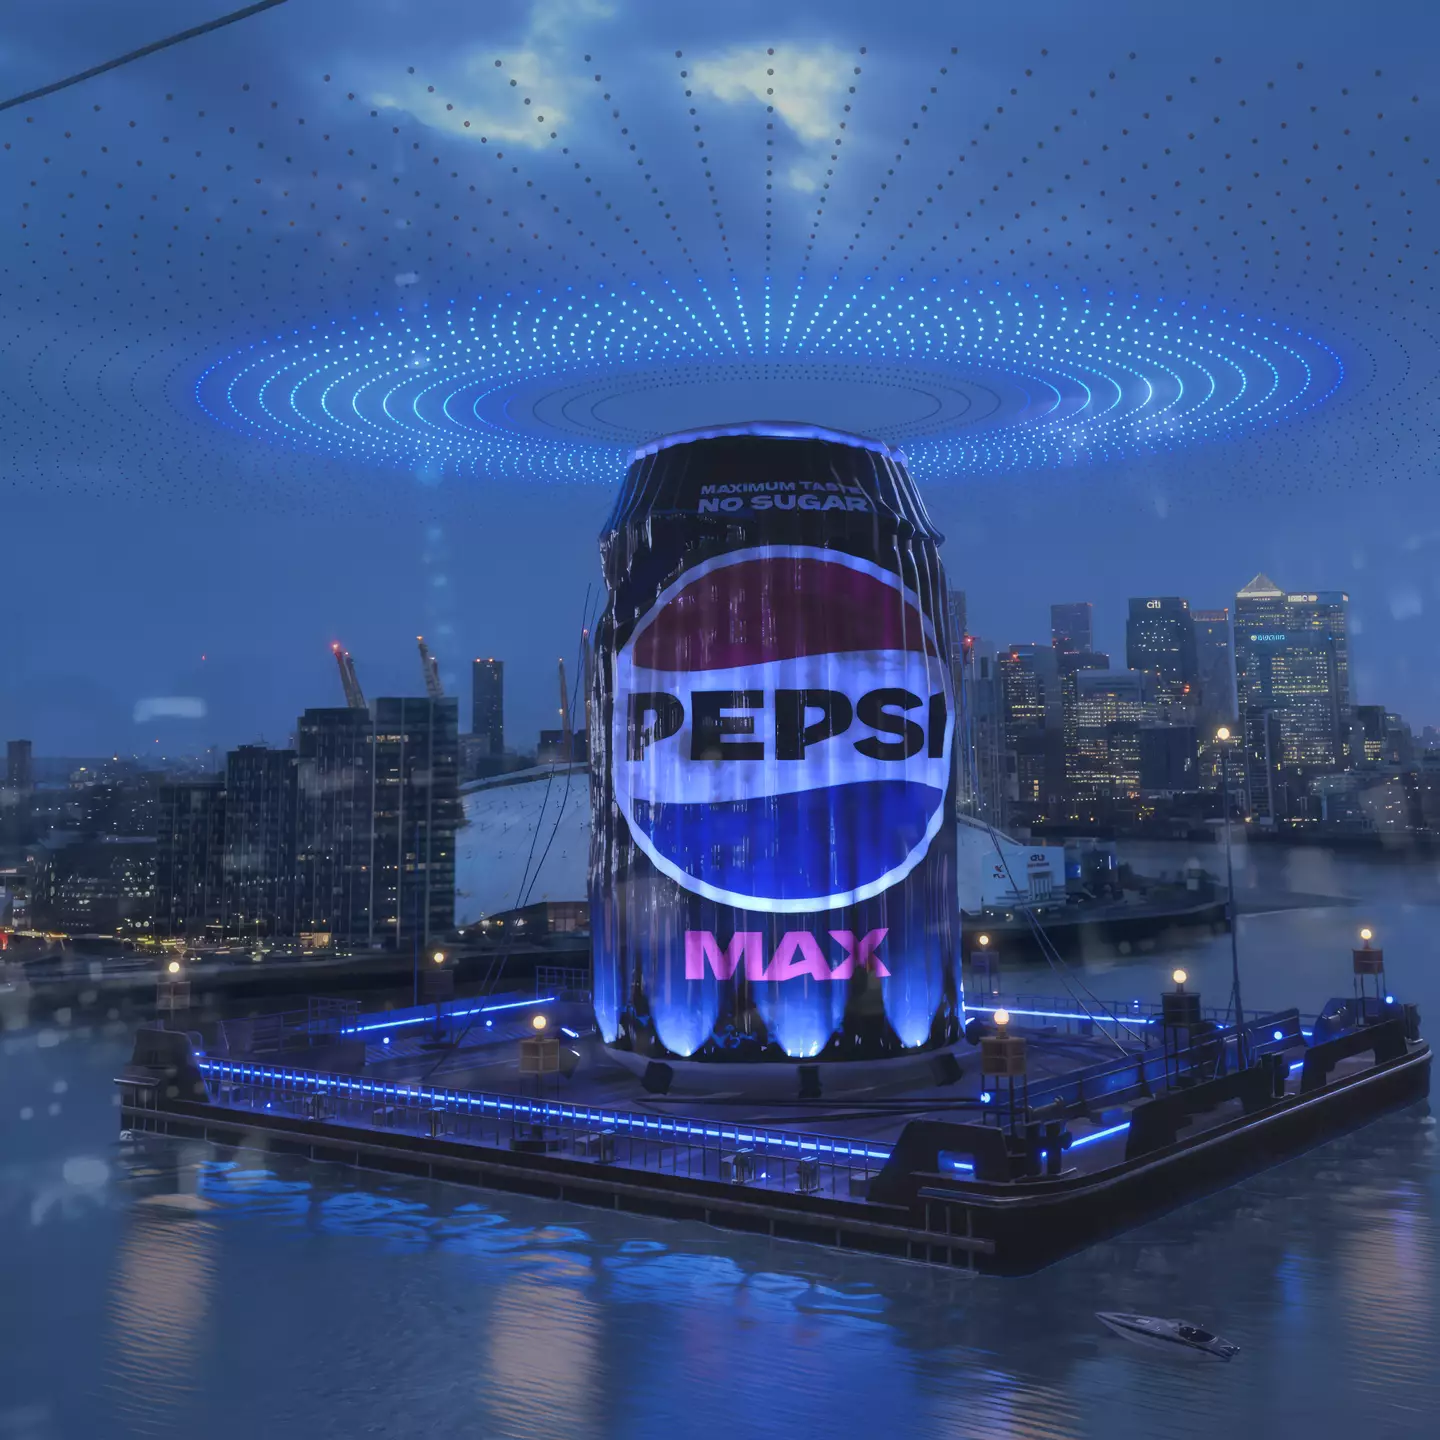 Pepsi made a giant can emerge from the River Thames in London.